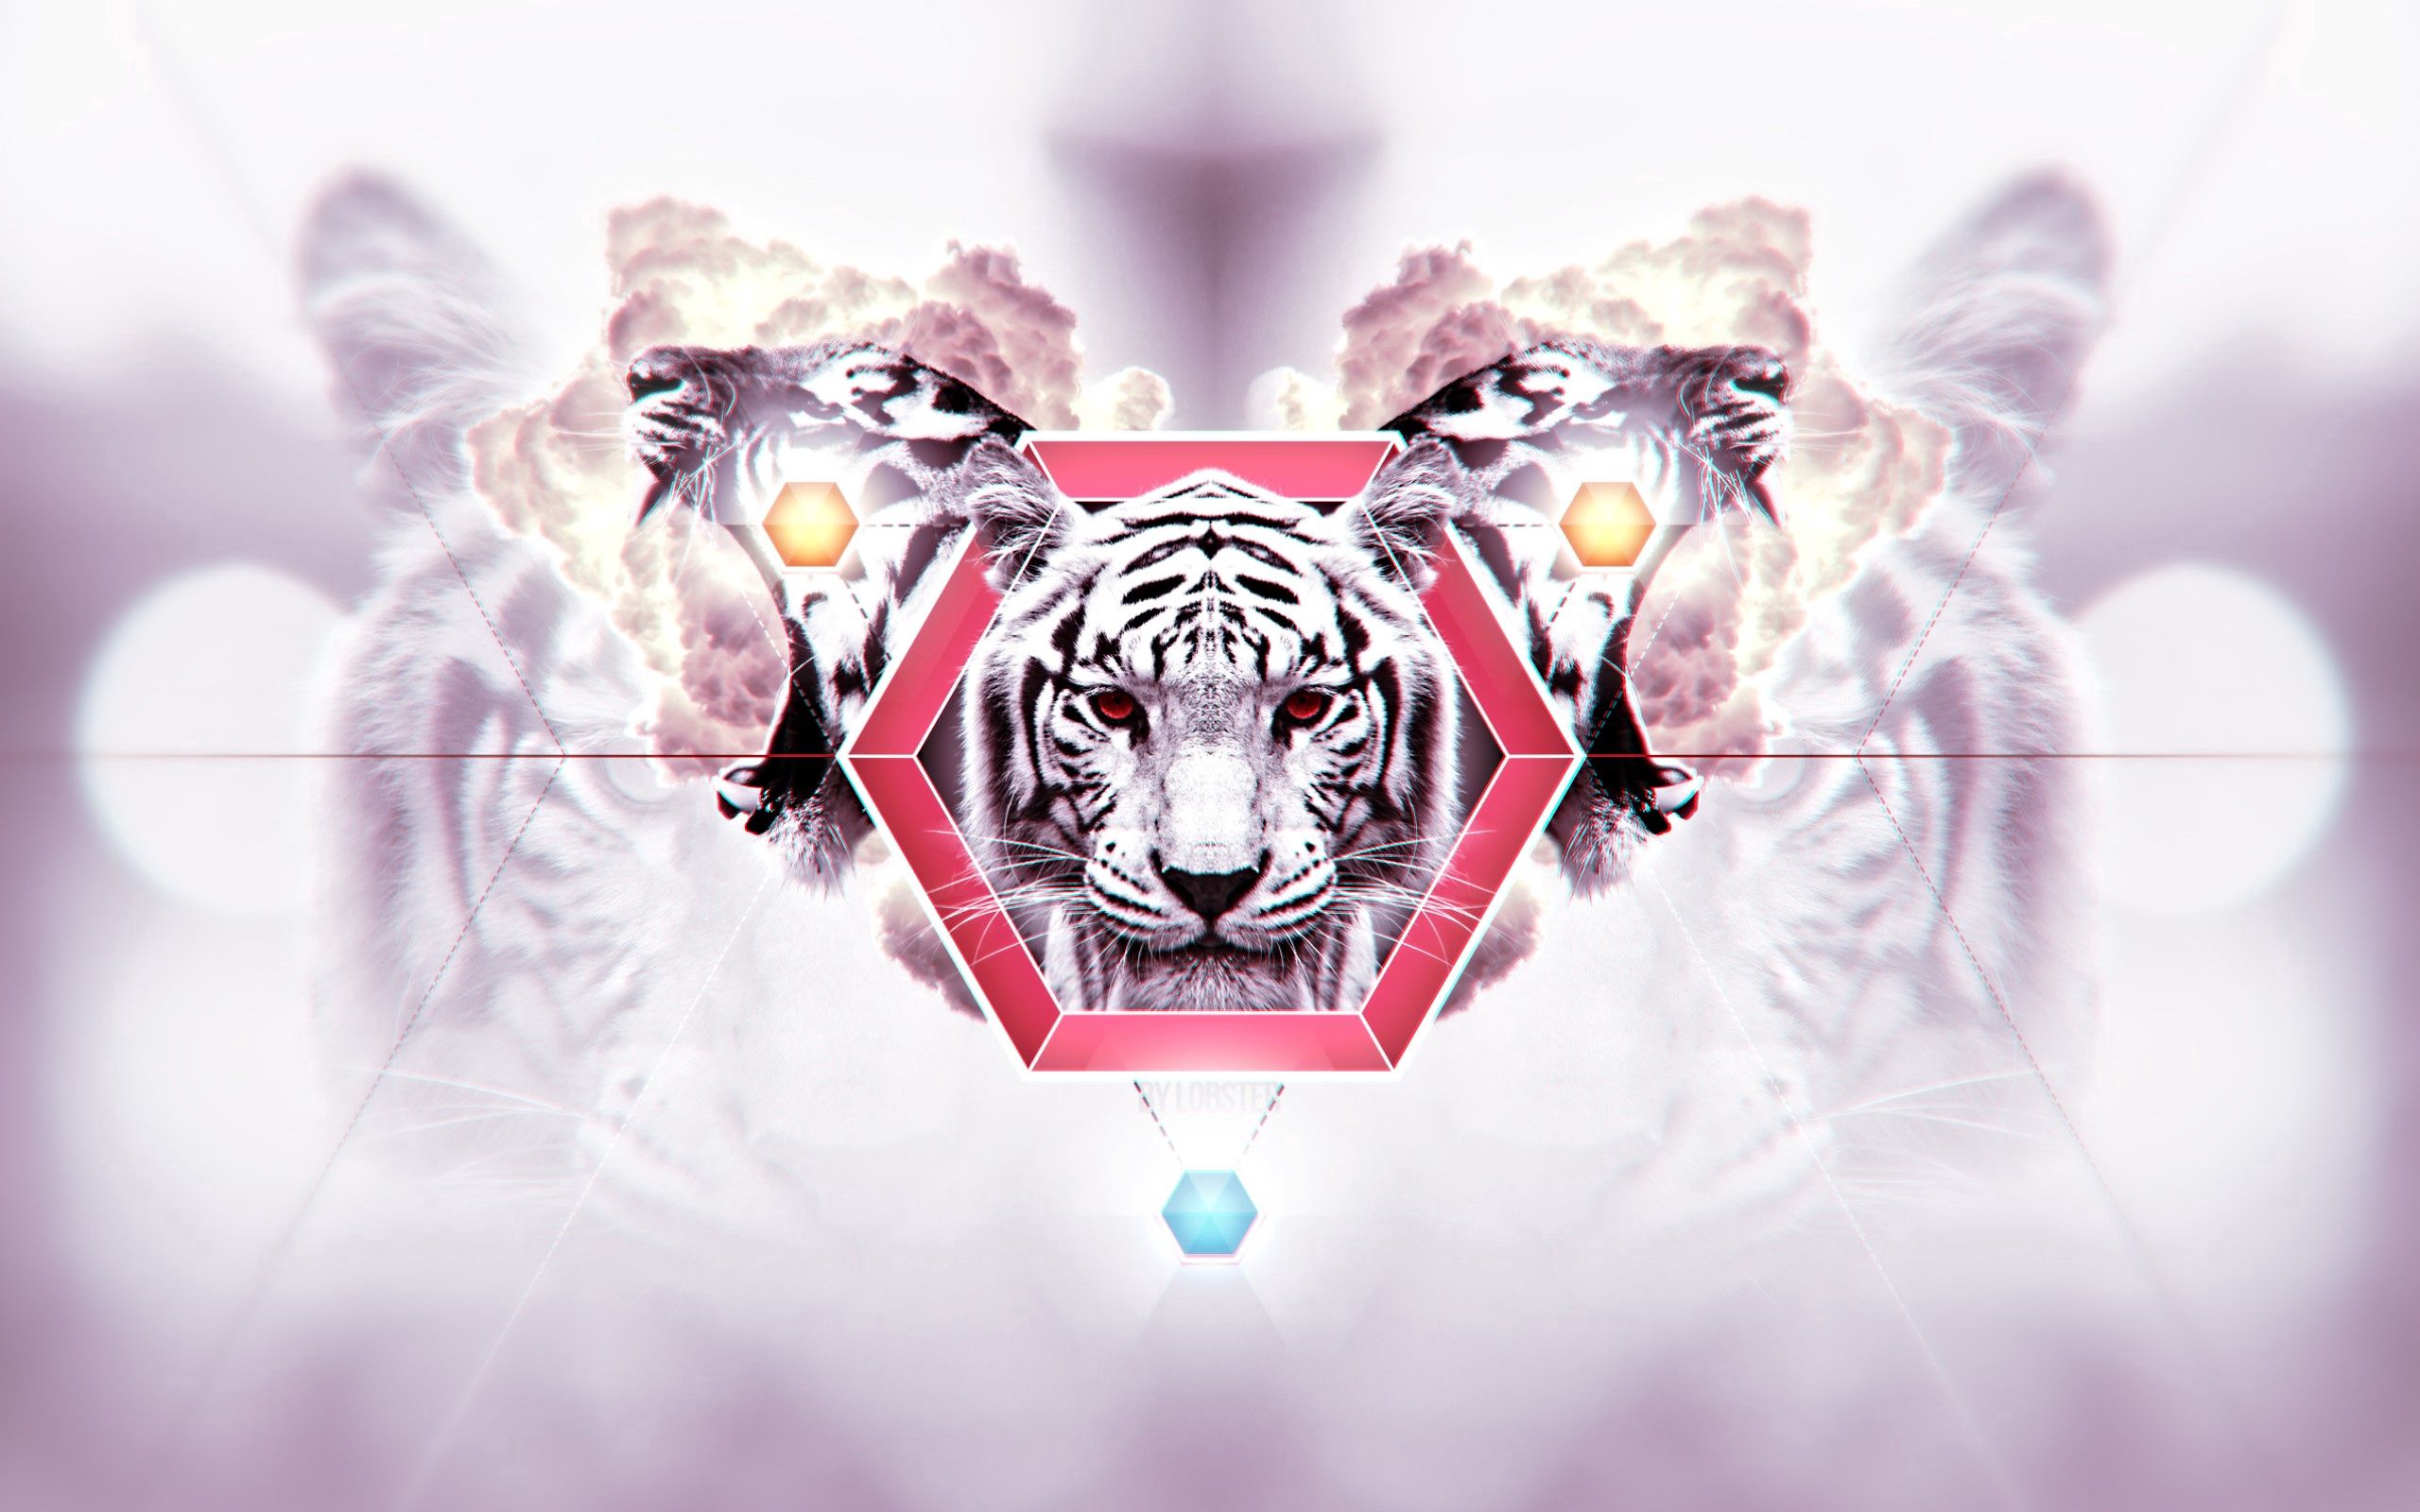 High Definition wallpaper muzzle, tiger, background, abstract